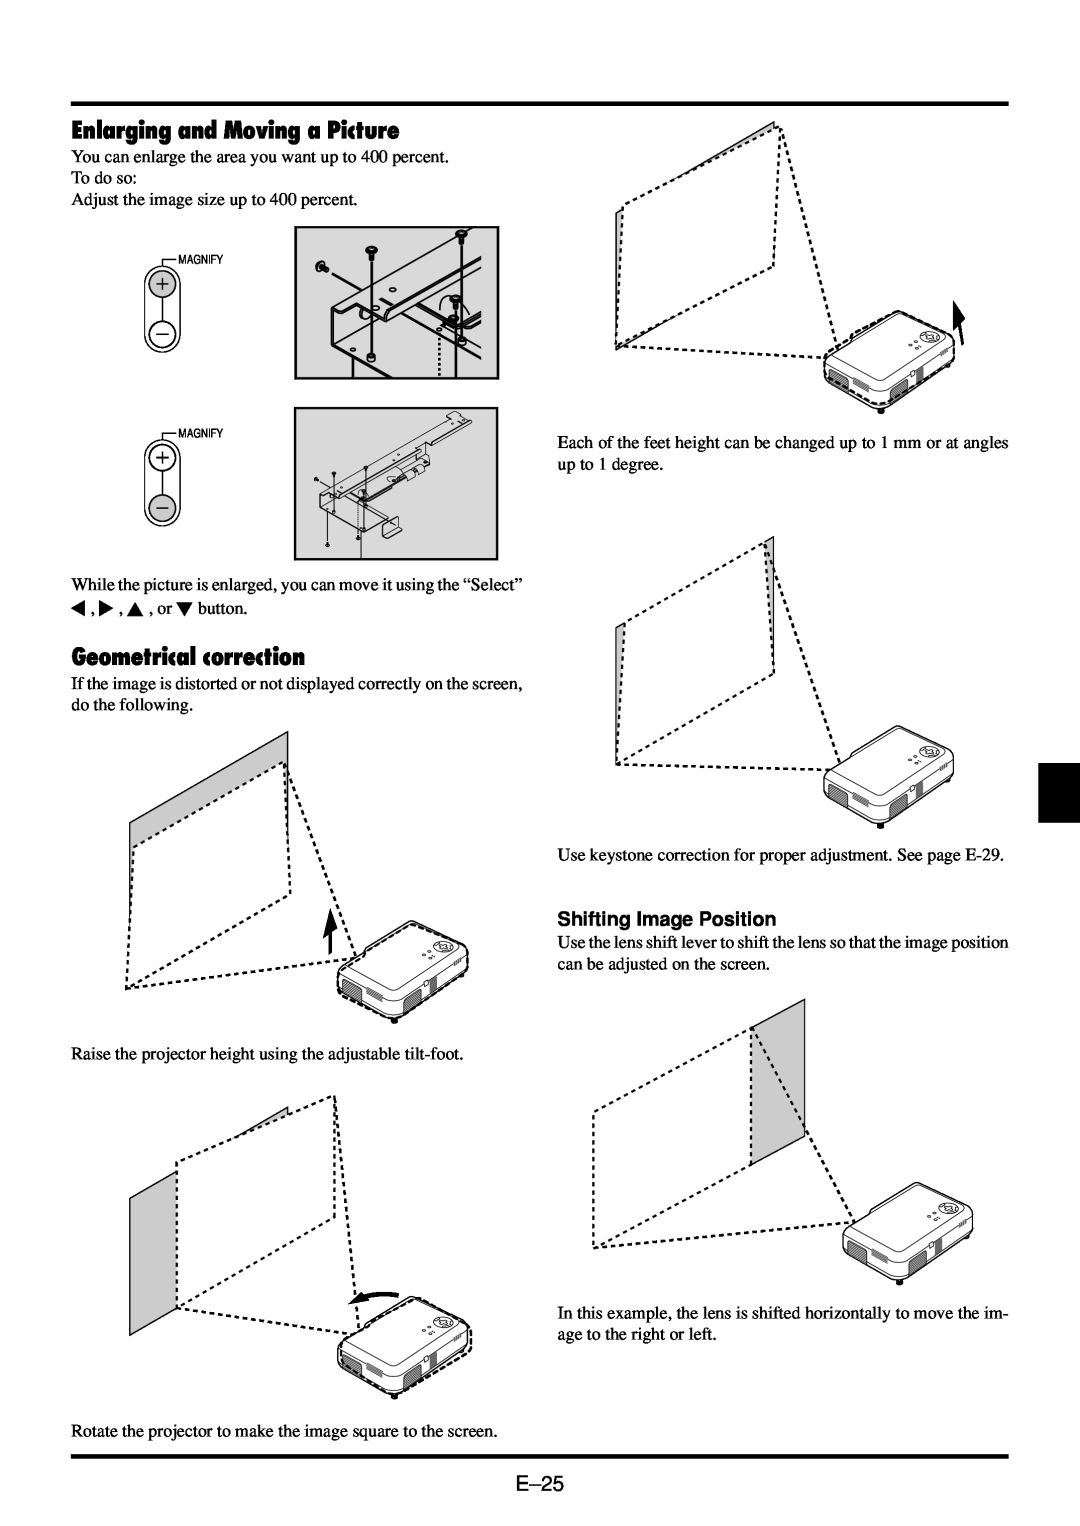 NEC VT45 user manual Enlarging and Moving a Picture, Geometrical correction, Shifting Image Position 